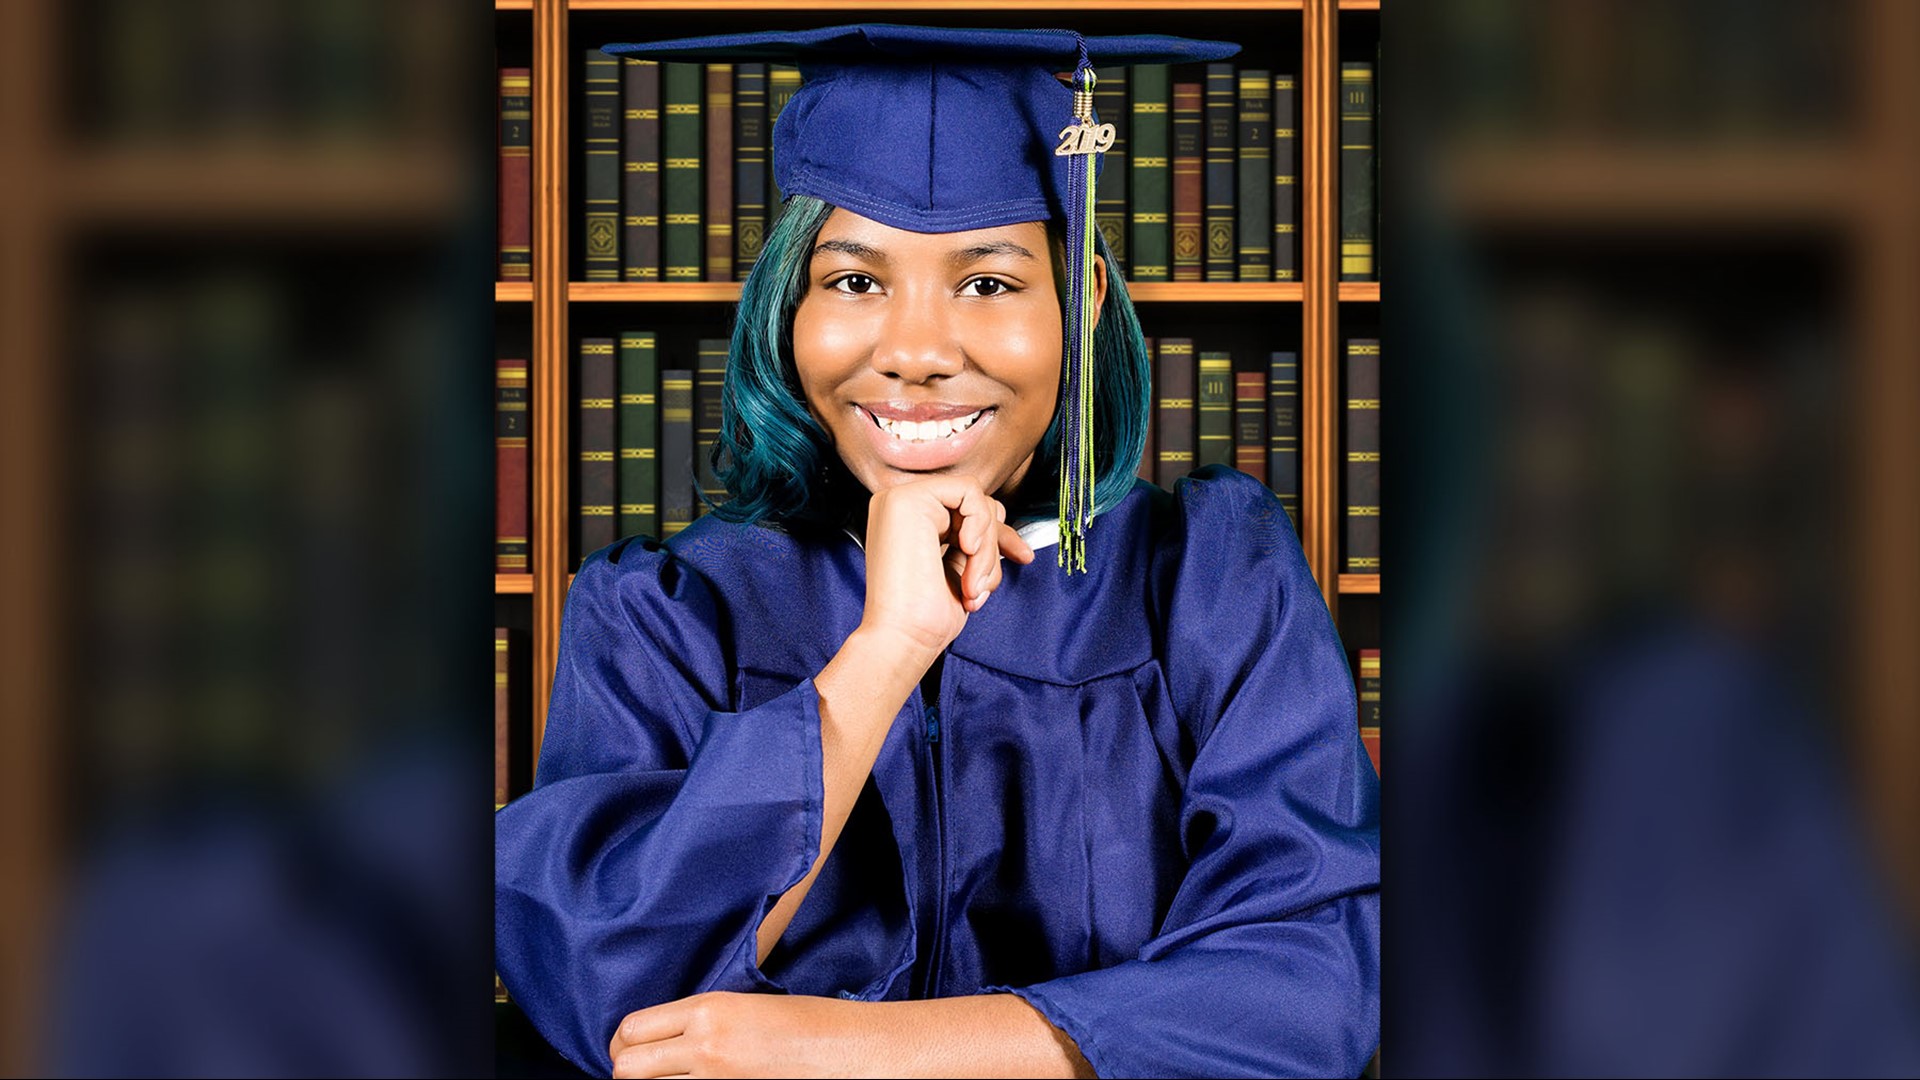 An International High School of New Orleans student has more than $3 million in scholarship offers, more than any other college-bound senior in the country so far.